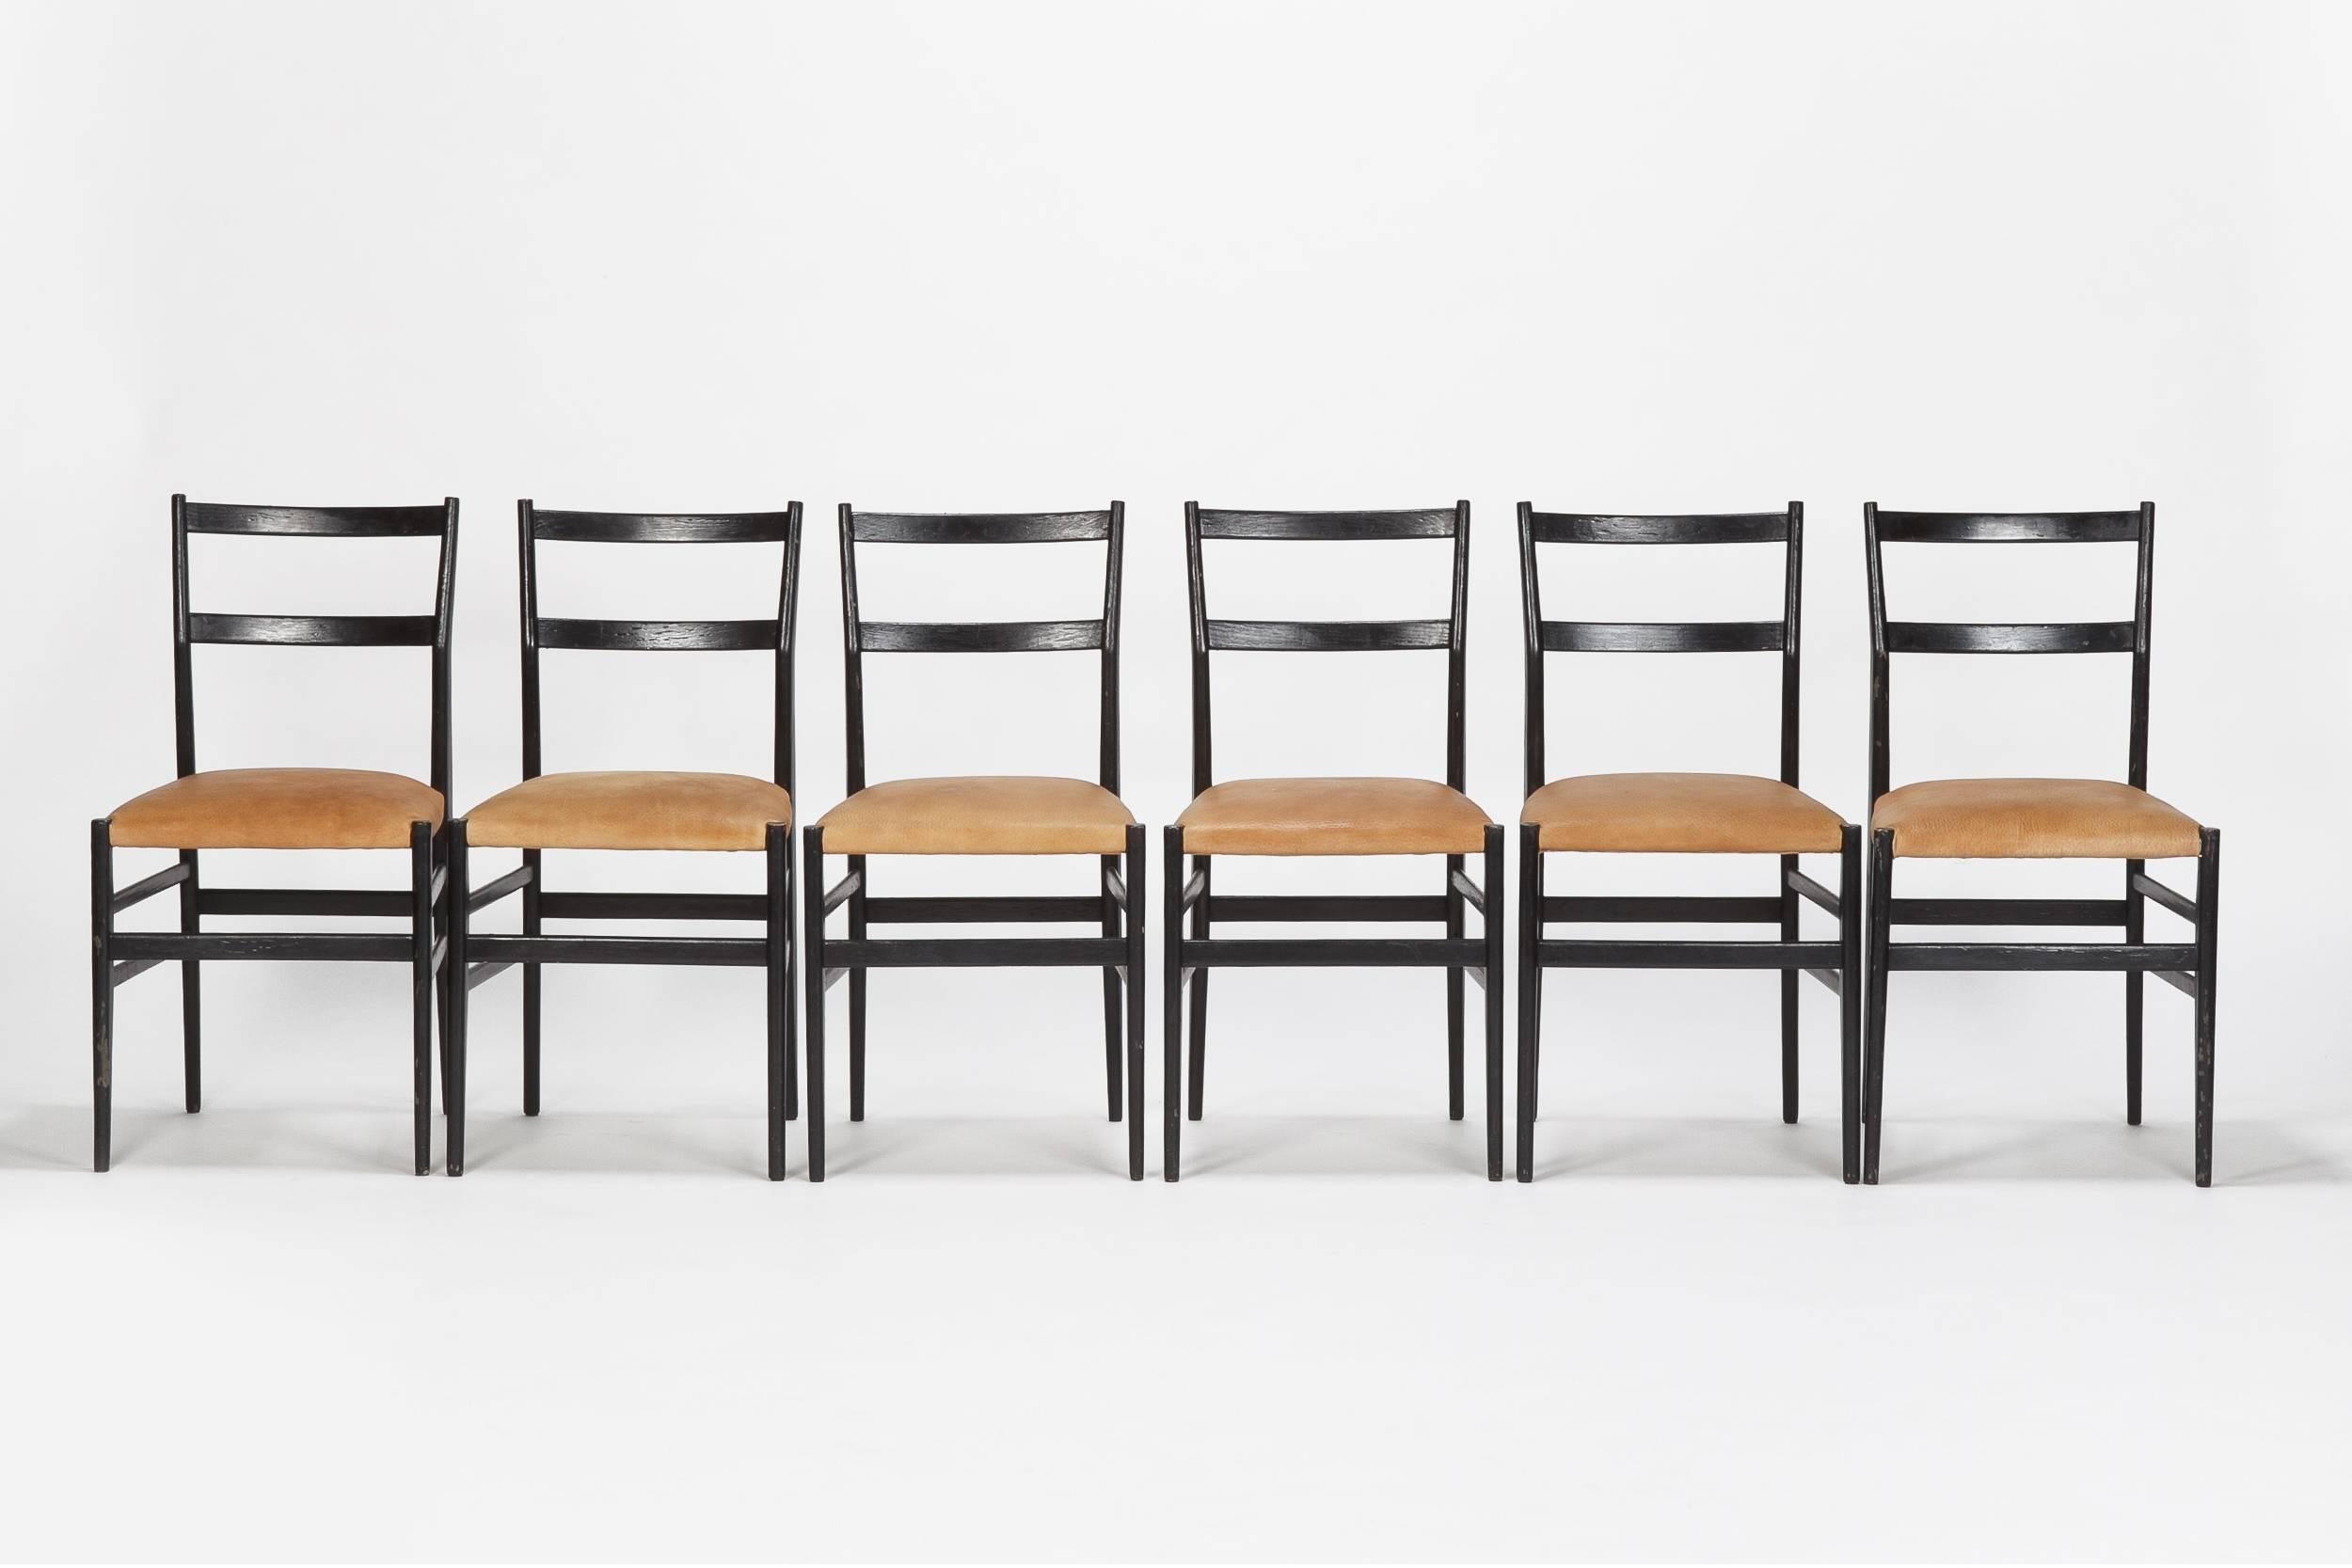 Leather 12 Gio Ponti Leggera Chairs by Cassina, 1950s For Sale